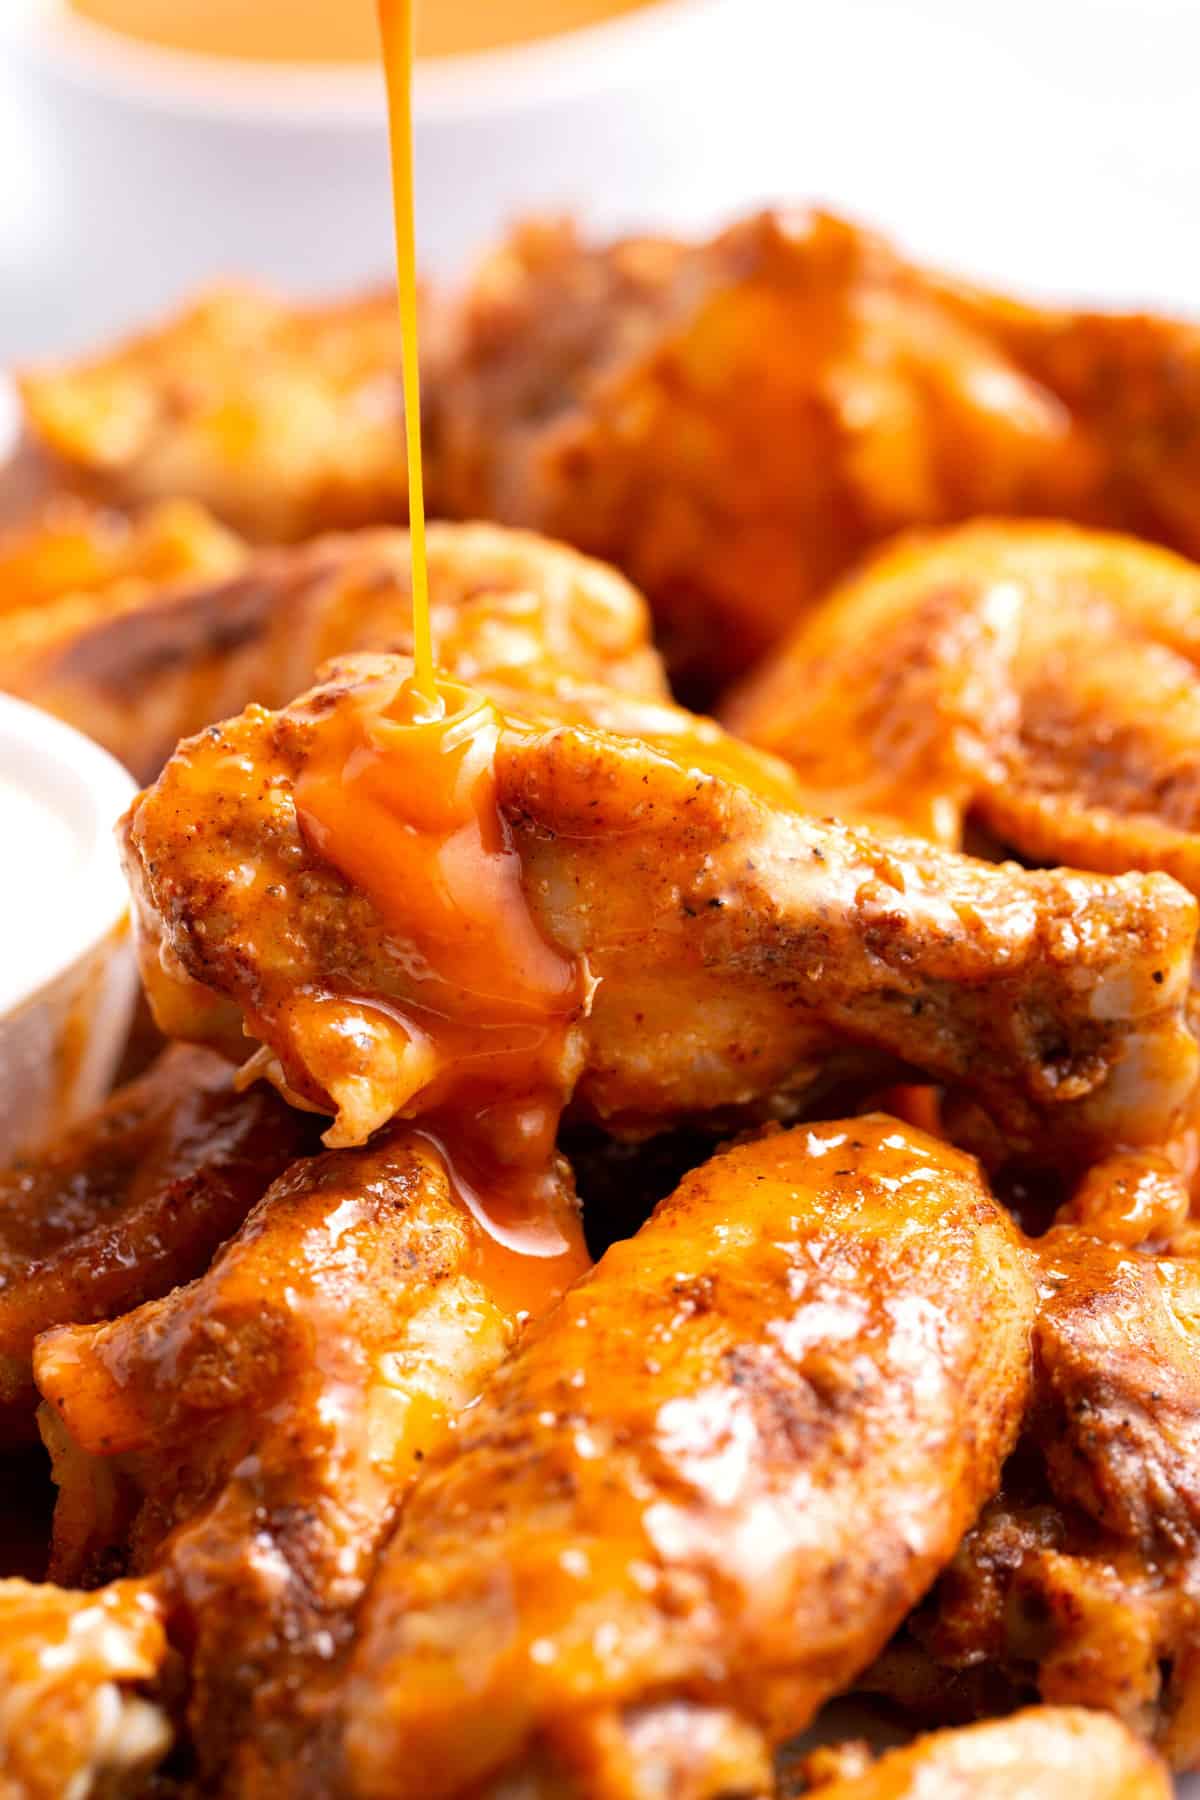 buffalo sauce being poured on a pile of crockpot chicken wings